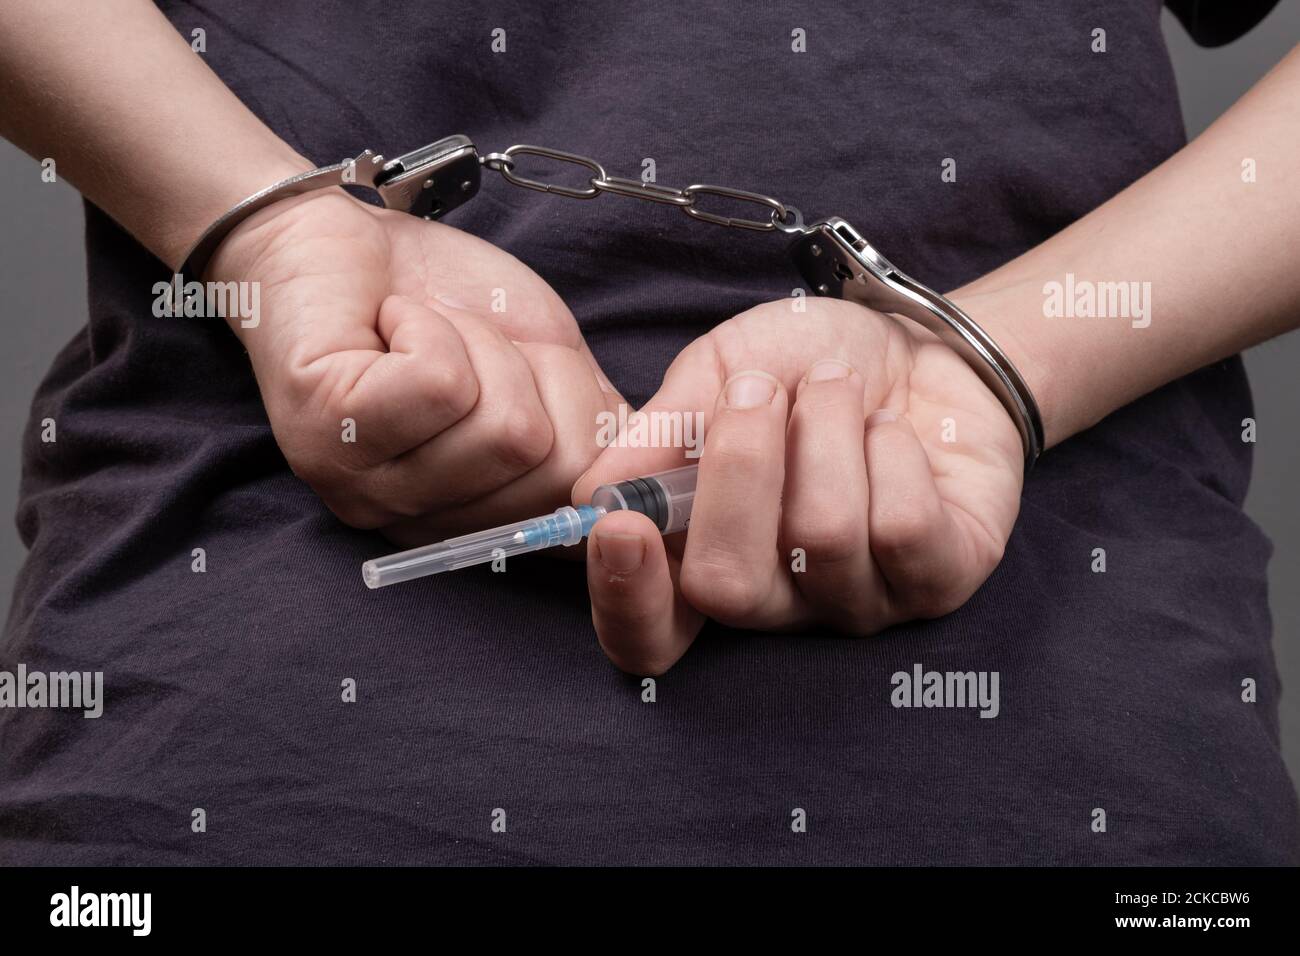 drug trafficking, a man in handcuffs with a syringe. Stock Photo